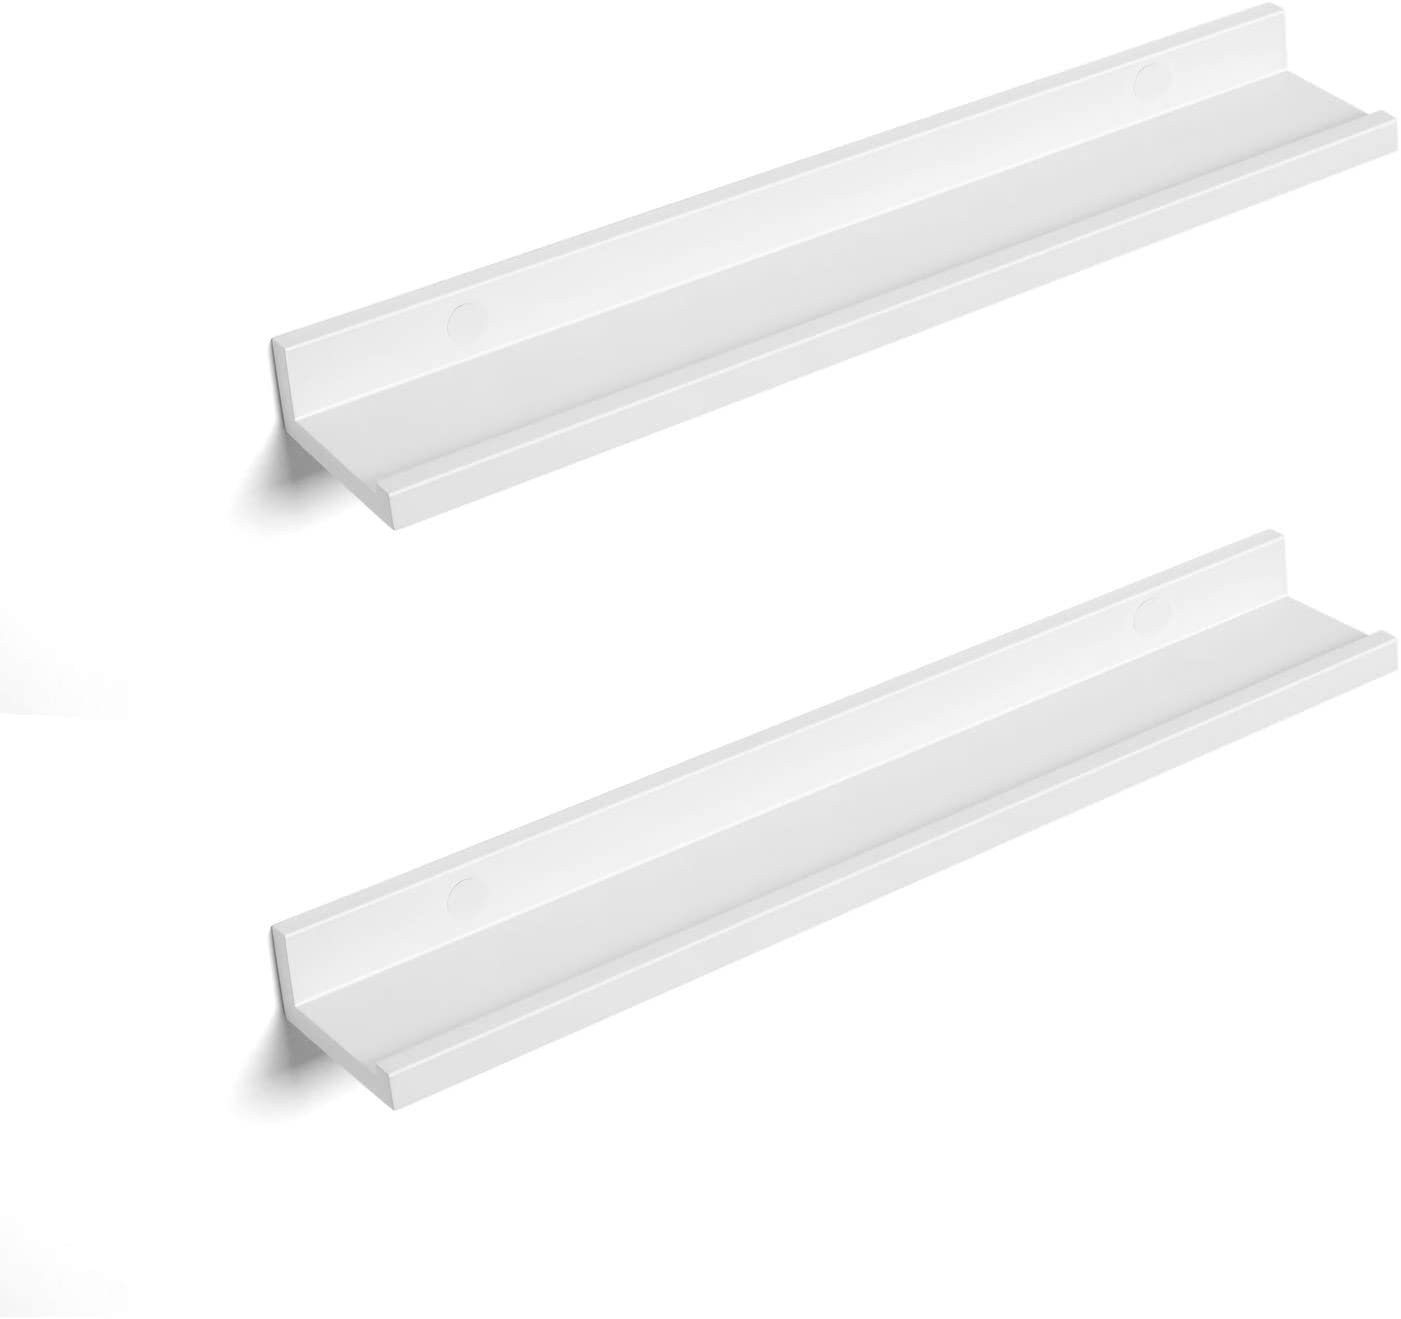 Wall Shelf Set of 2, 2 Suspended Shelves with High Gloss Finish, Wall Shelf for Picture Frames and Books, Living Room, Bedroom, Bathroom, Kitchen, Stable, Easy Assembly, White, Glossy LWS60WT RAW58.dk 